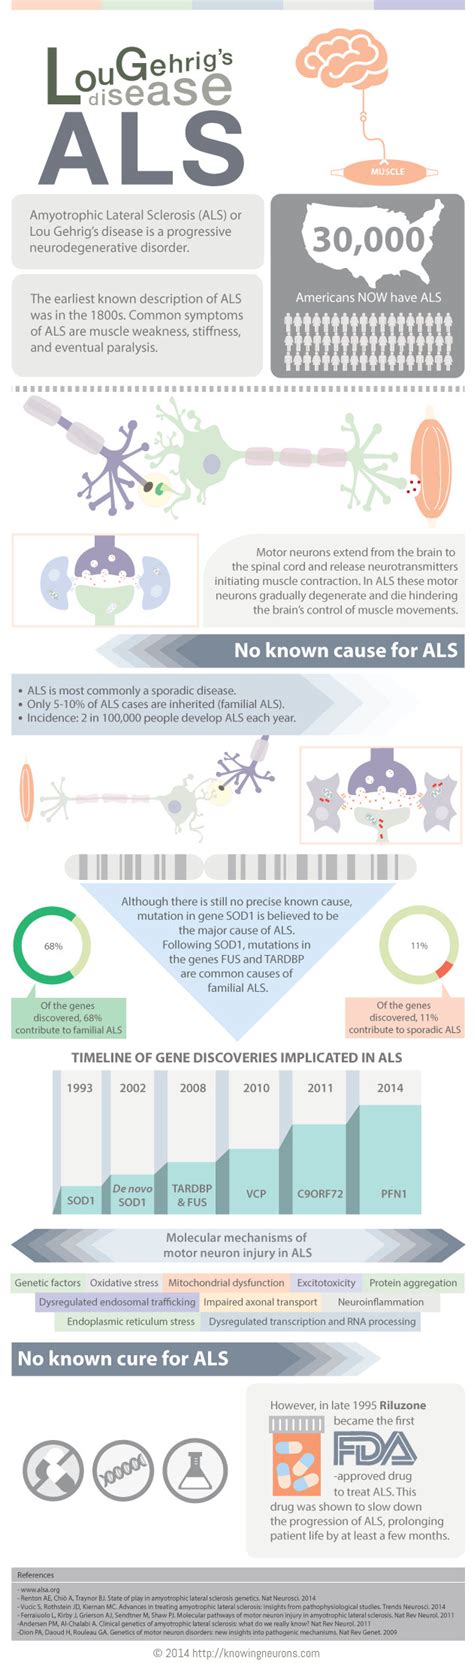 Als Amyotrophic Lateral Sclerosis Infographic Visualistan